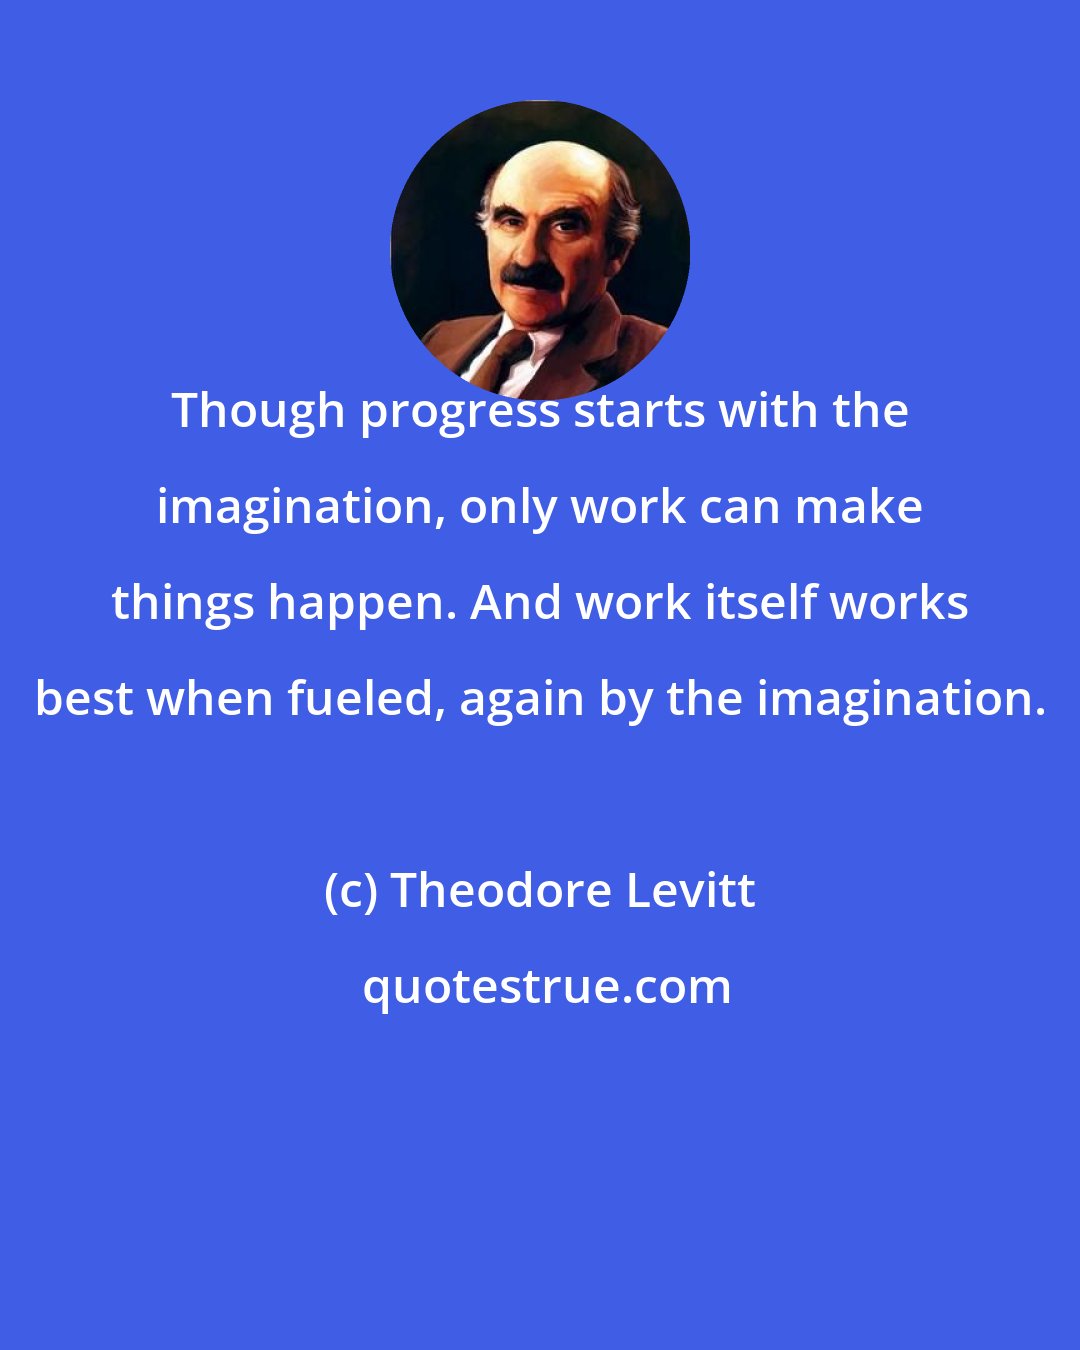 Theodore Levitt: Though progress starts with the imagination, only work can make things happen. And work itself works best when fueled, again by the imagination.